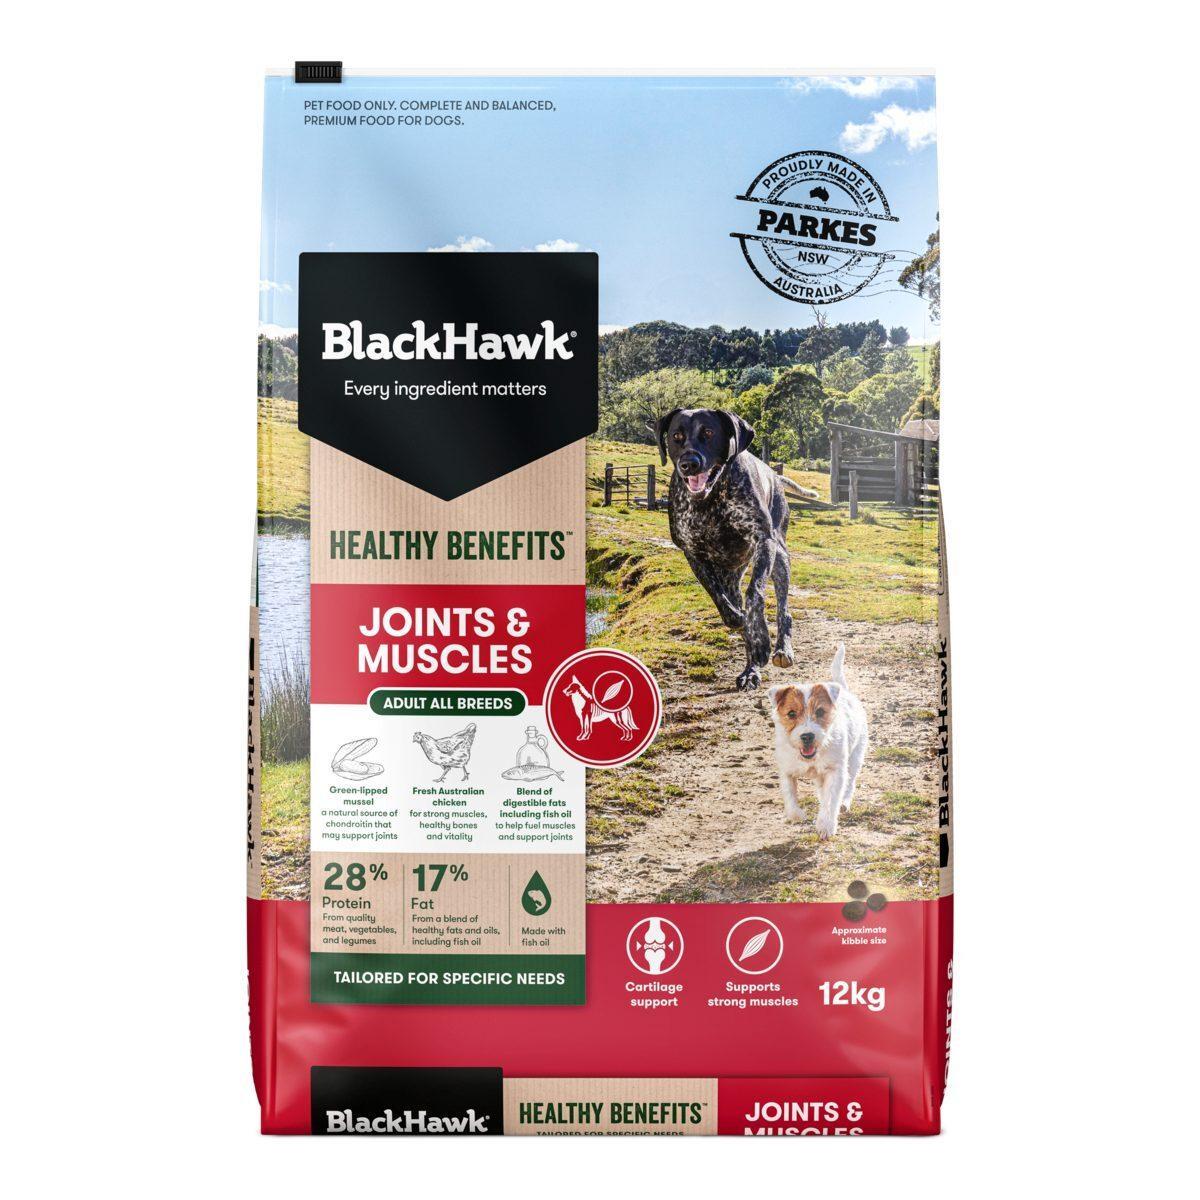 Black Hawk Healthy Benefits Joints & Muscles Dry Dog Food 12kg